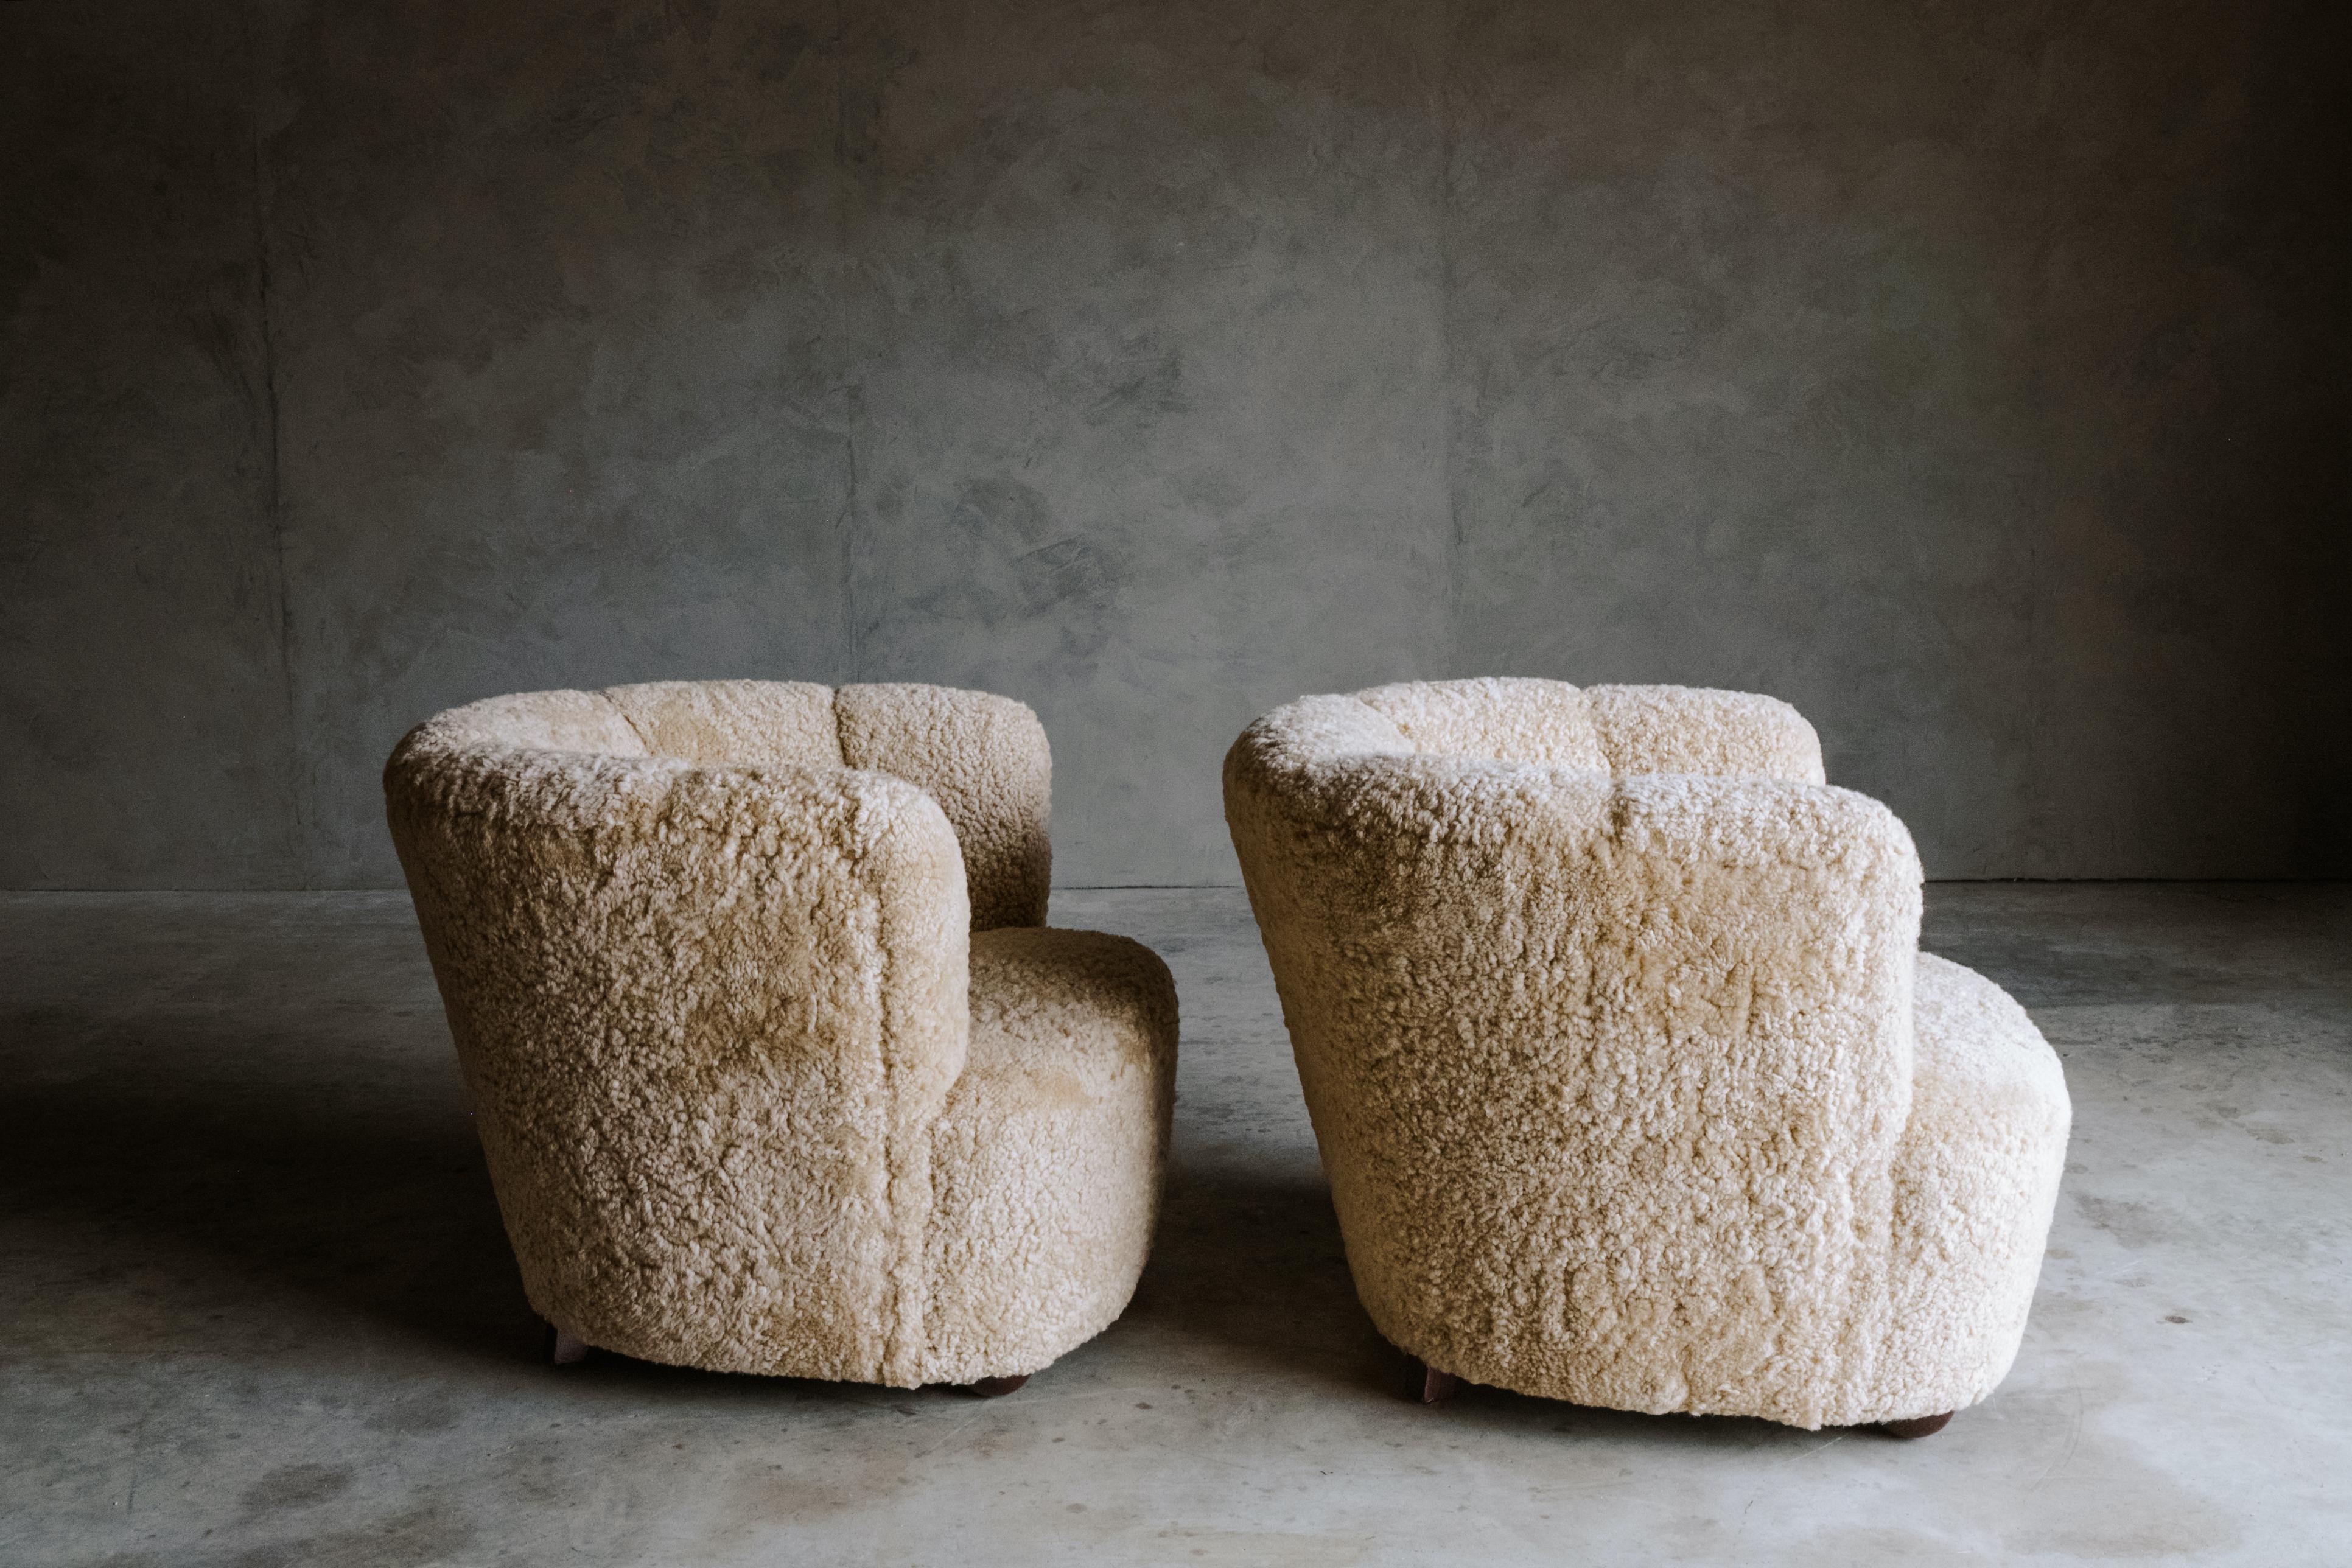 Vintage pair of sheepskin lounge chairs from Denmark, Circa 1950. Nice barrel back shape. Professionally reupholstered in Denmark with very soft light tan shearling.